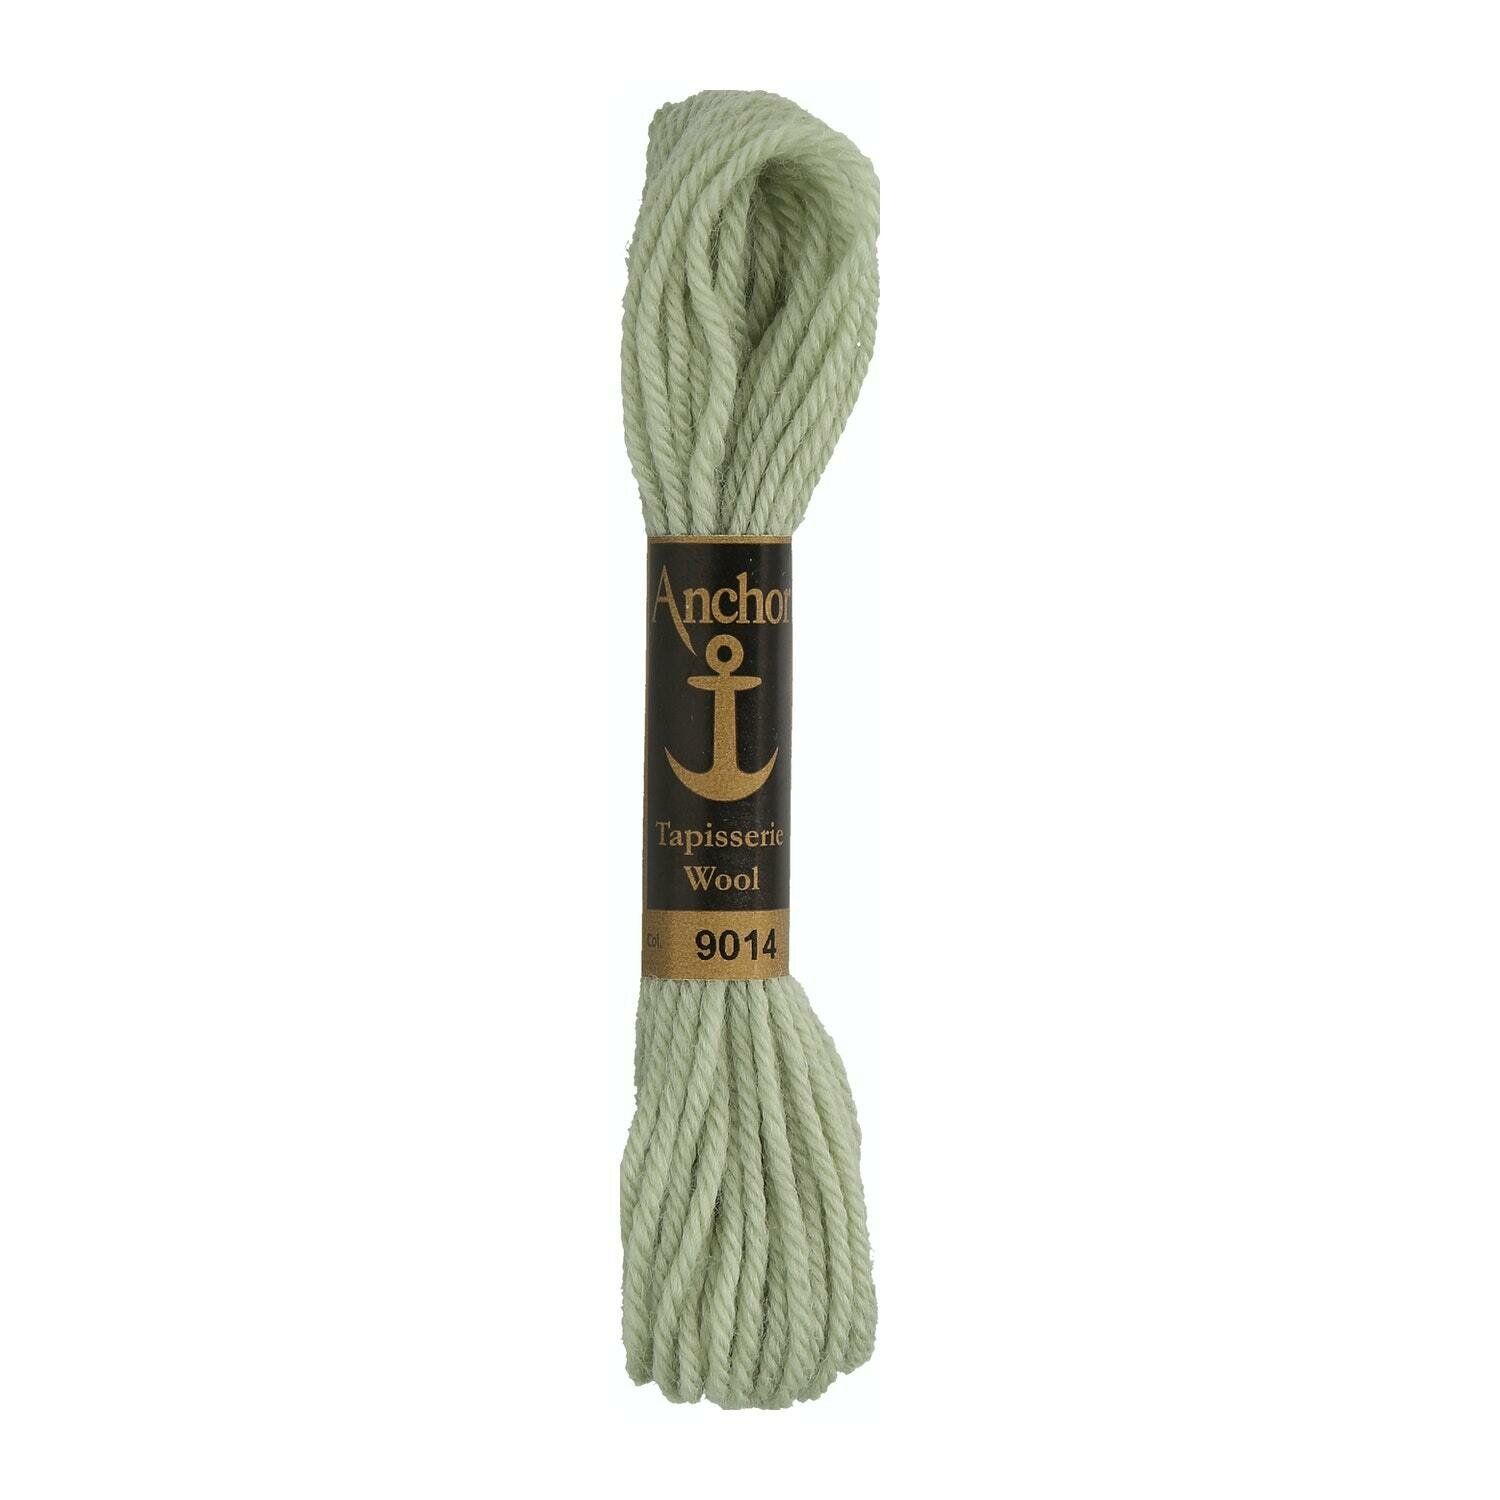 Anchor Tapisserie Wool # 09014